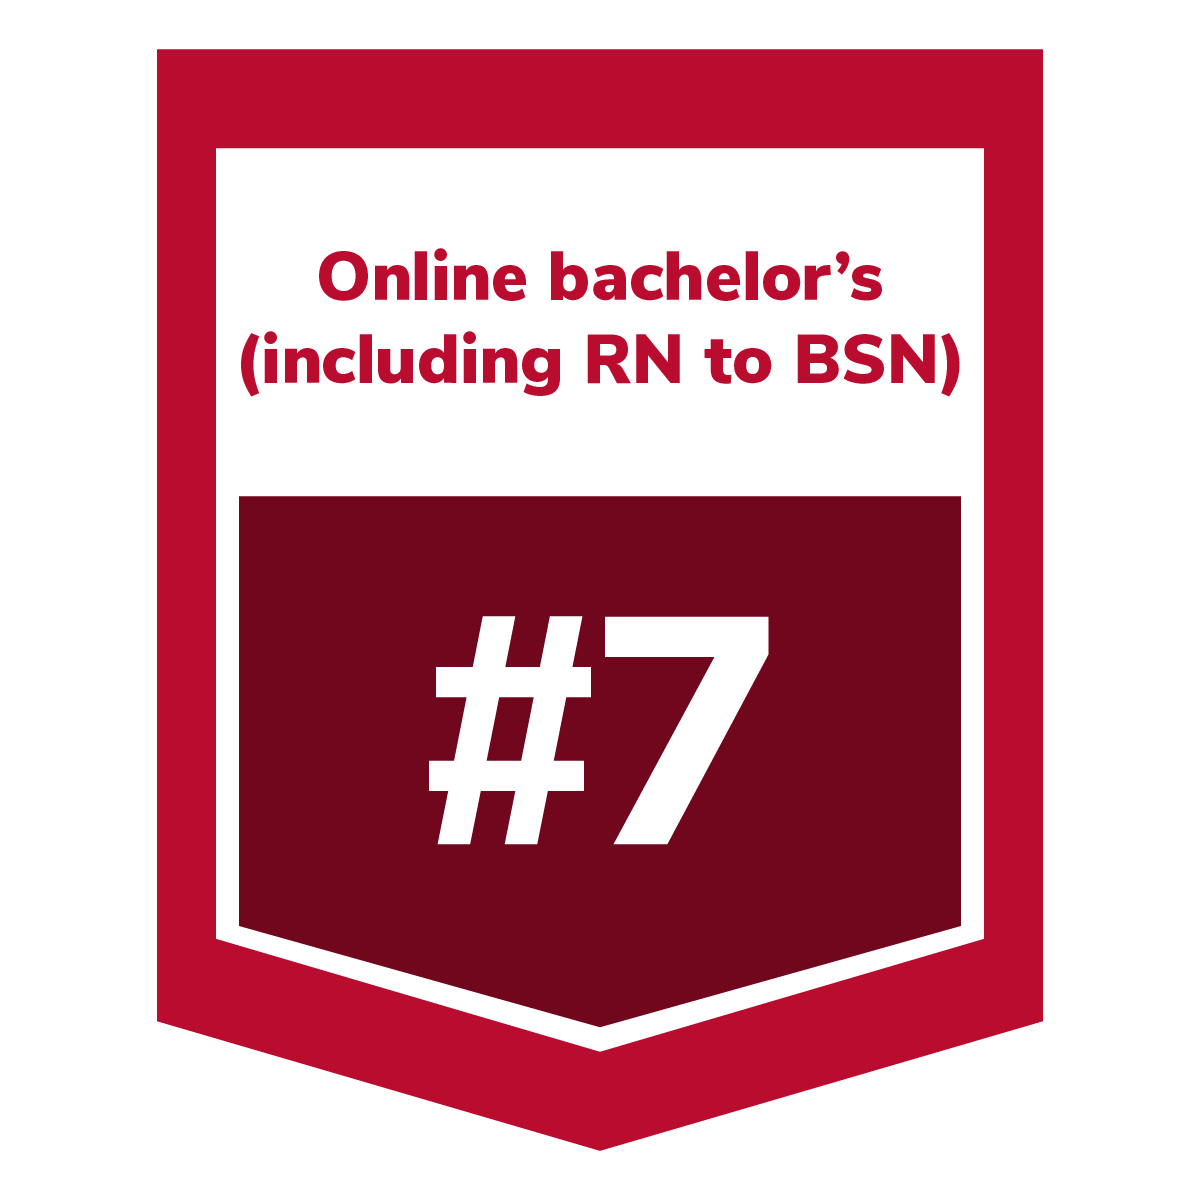 illustrated banner online bachelor's (including RN to BSN) ranked #7